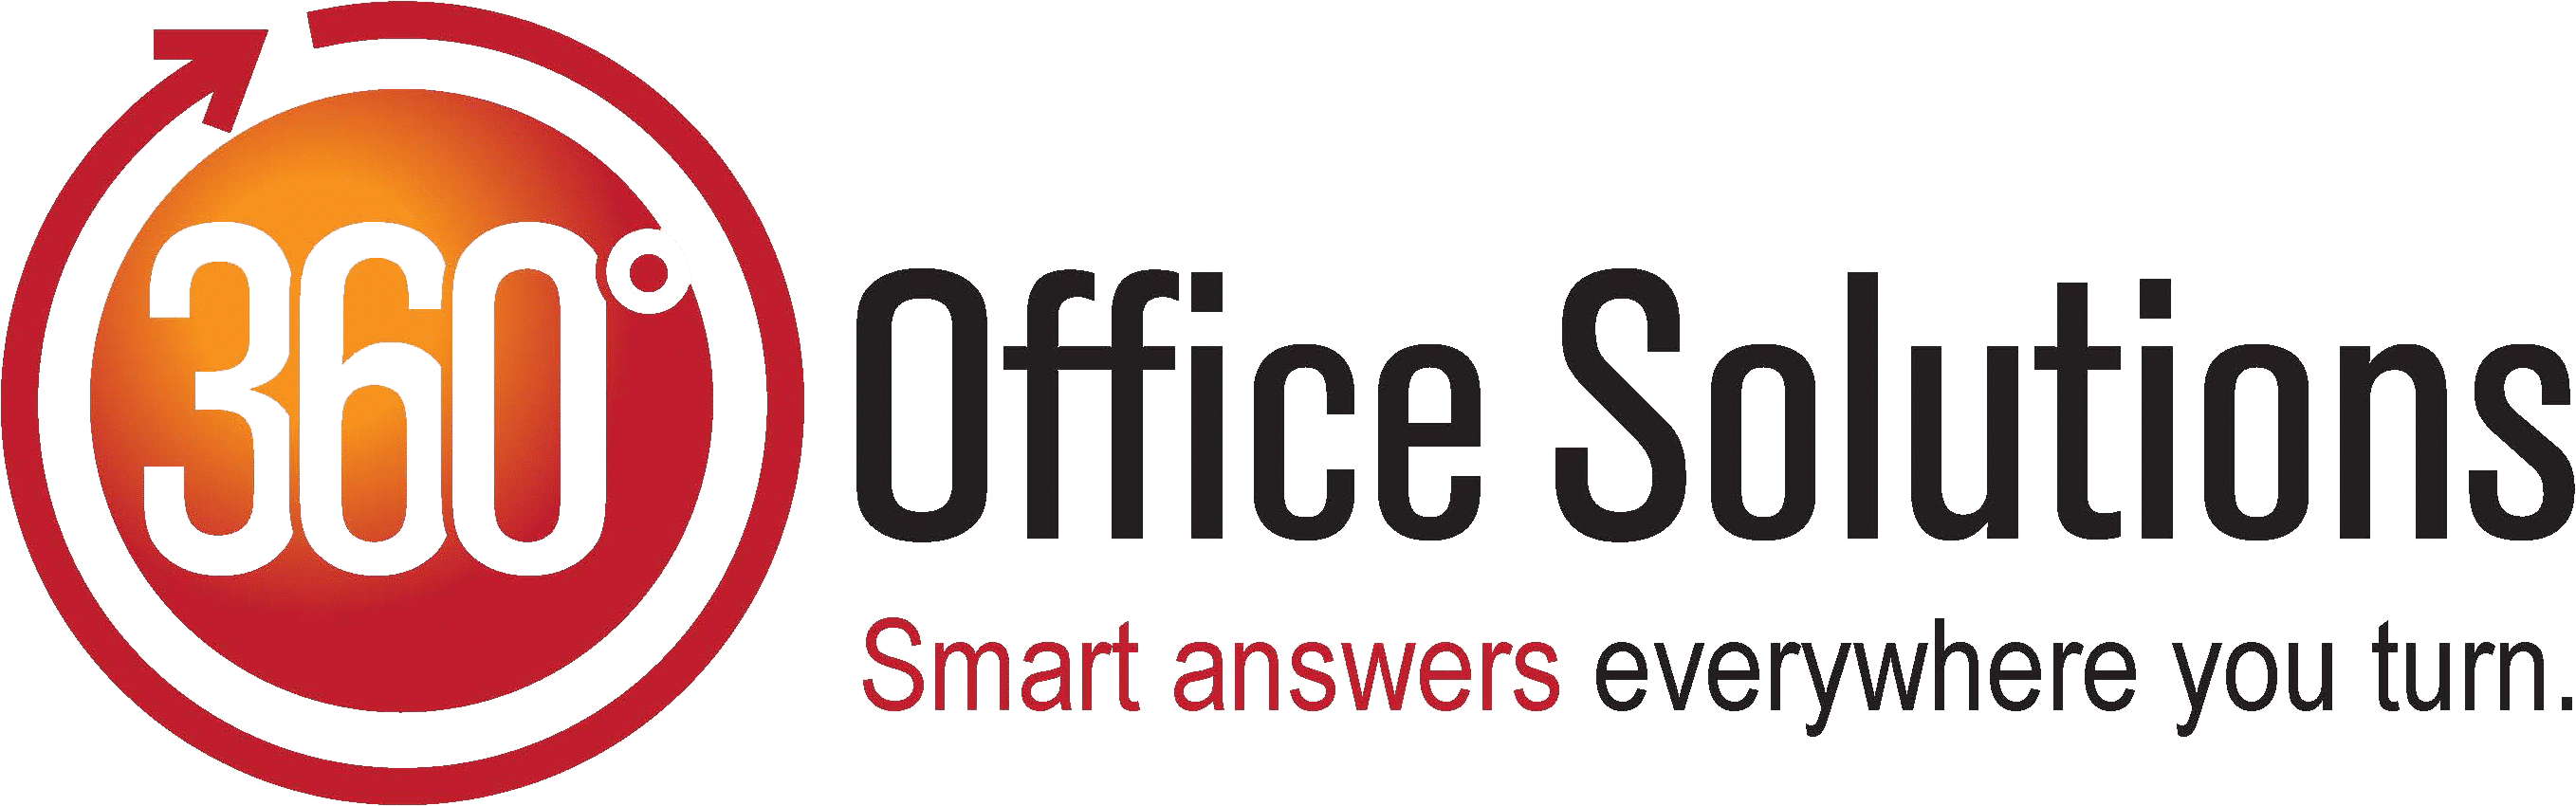 logo-transparent-white-360 - 360 Office Solutions